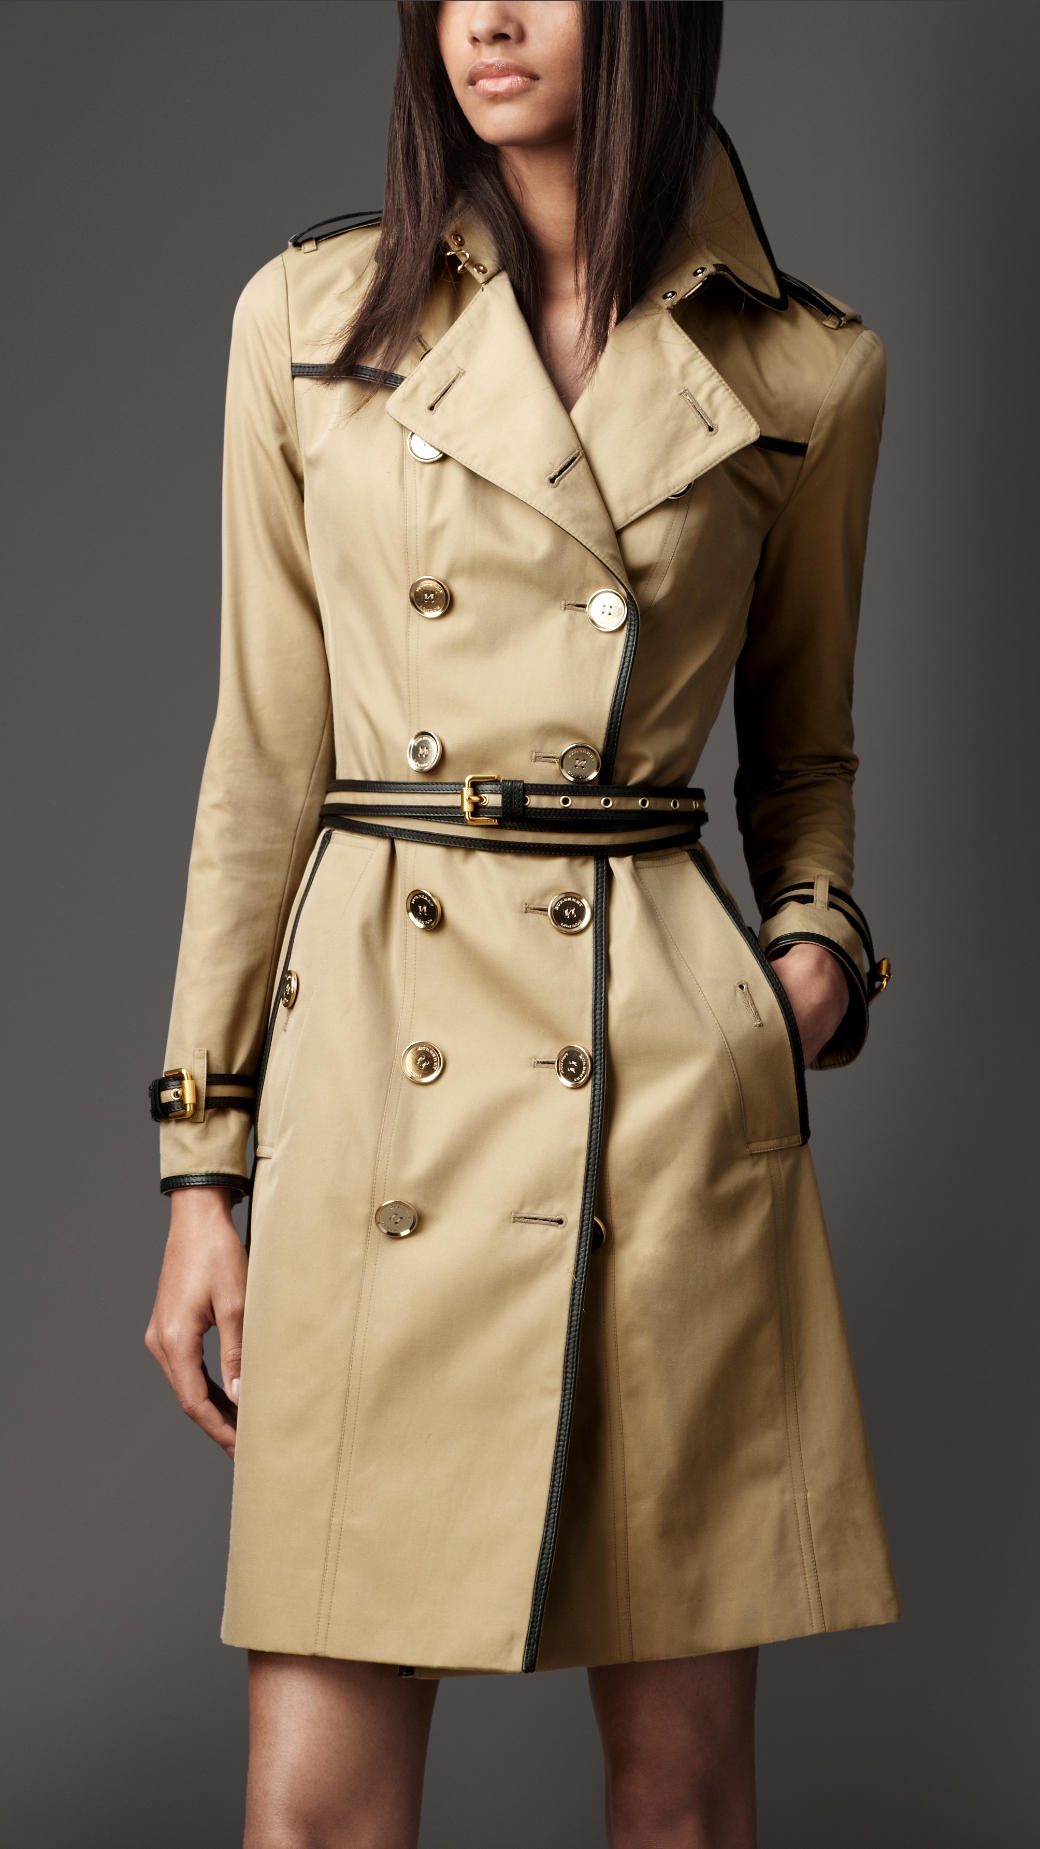 Burberry Long Cotton Gabardine Leather Detail Trench Coat in Pale ...